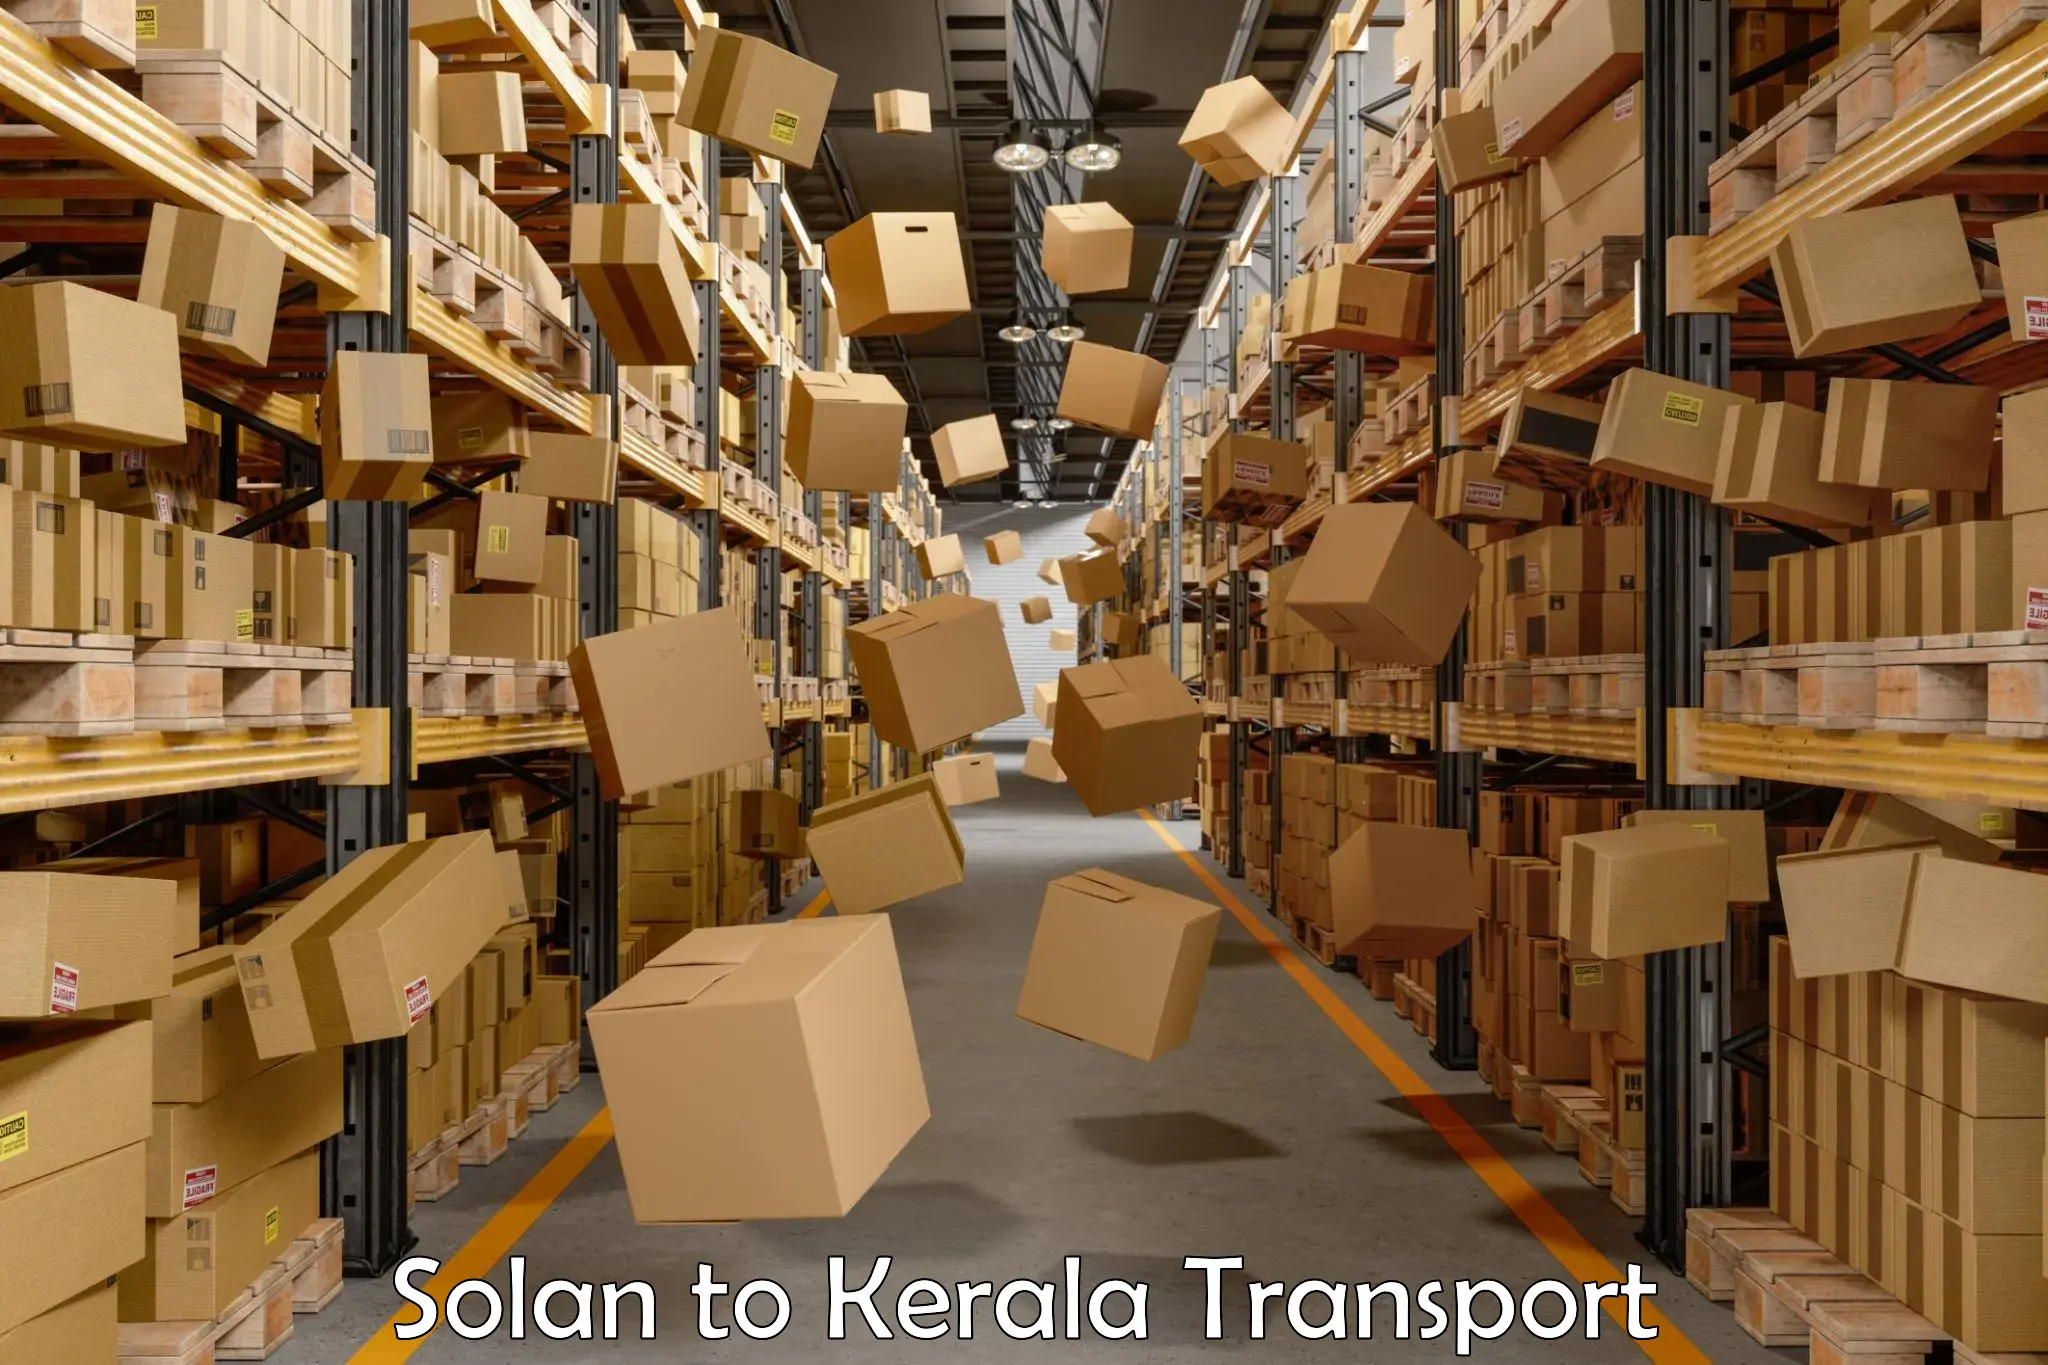 Daily transport service Solan to Ernakulam